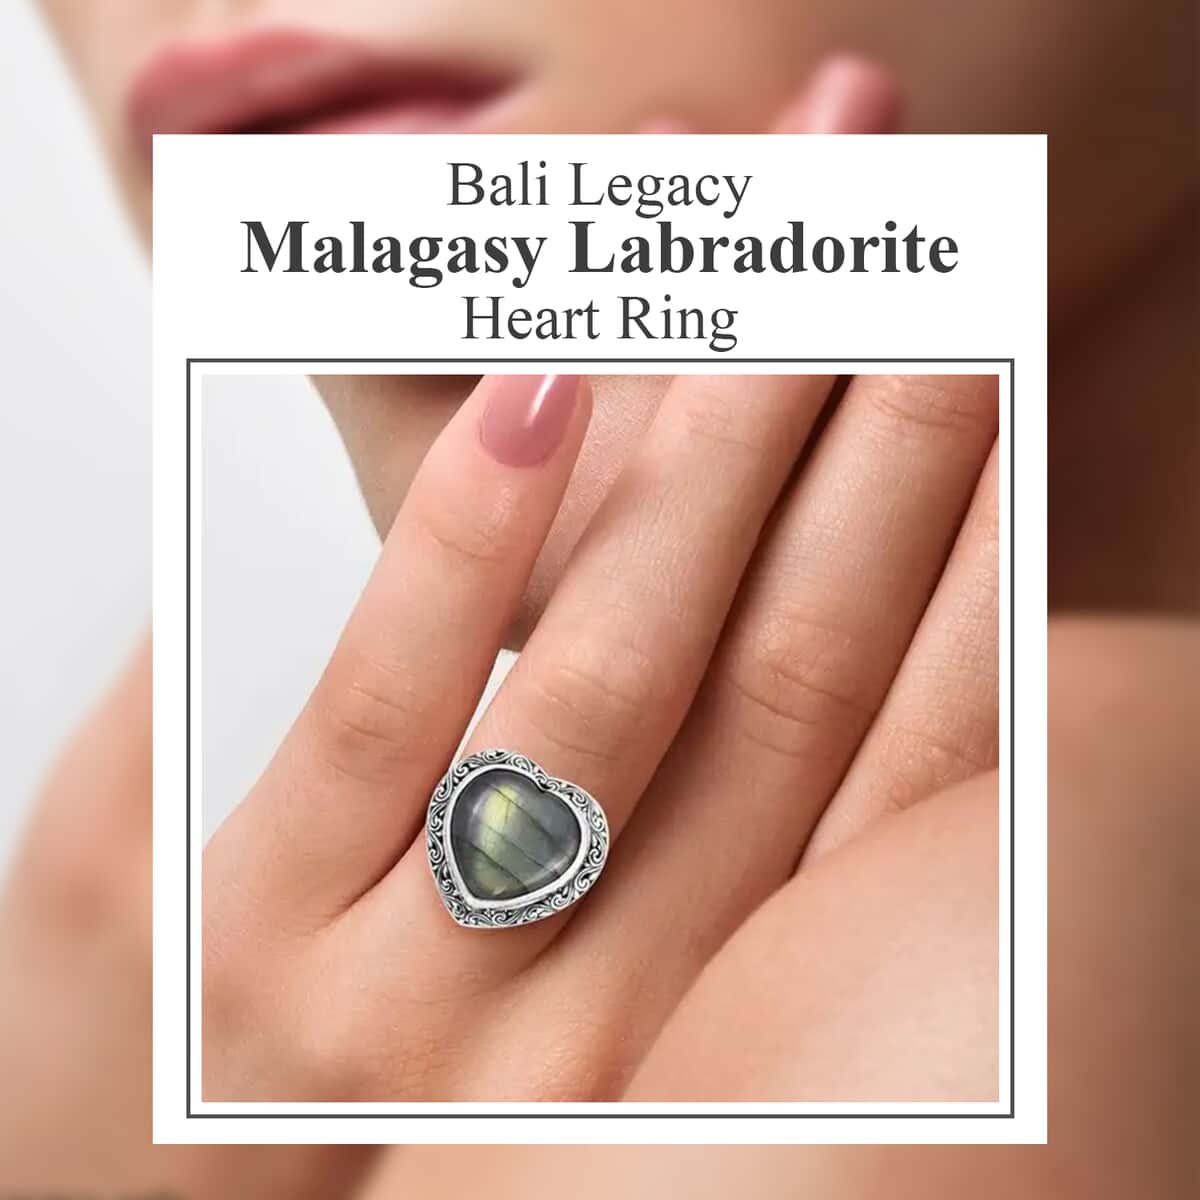 Bali Legacy Malagasy Labradorite Heart Ring, Sterling Silver Ring, Labradorite Ring, Gifts For Her 30.75 ctw (Size 6.0) image number 1